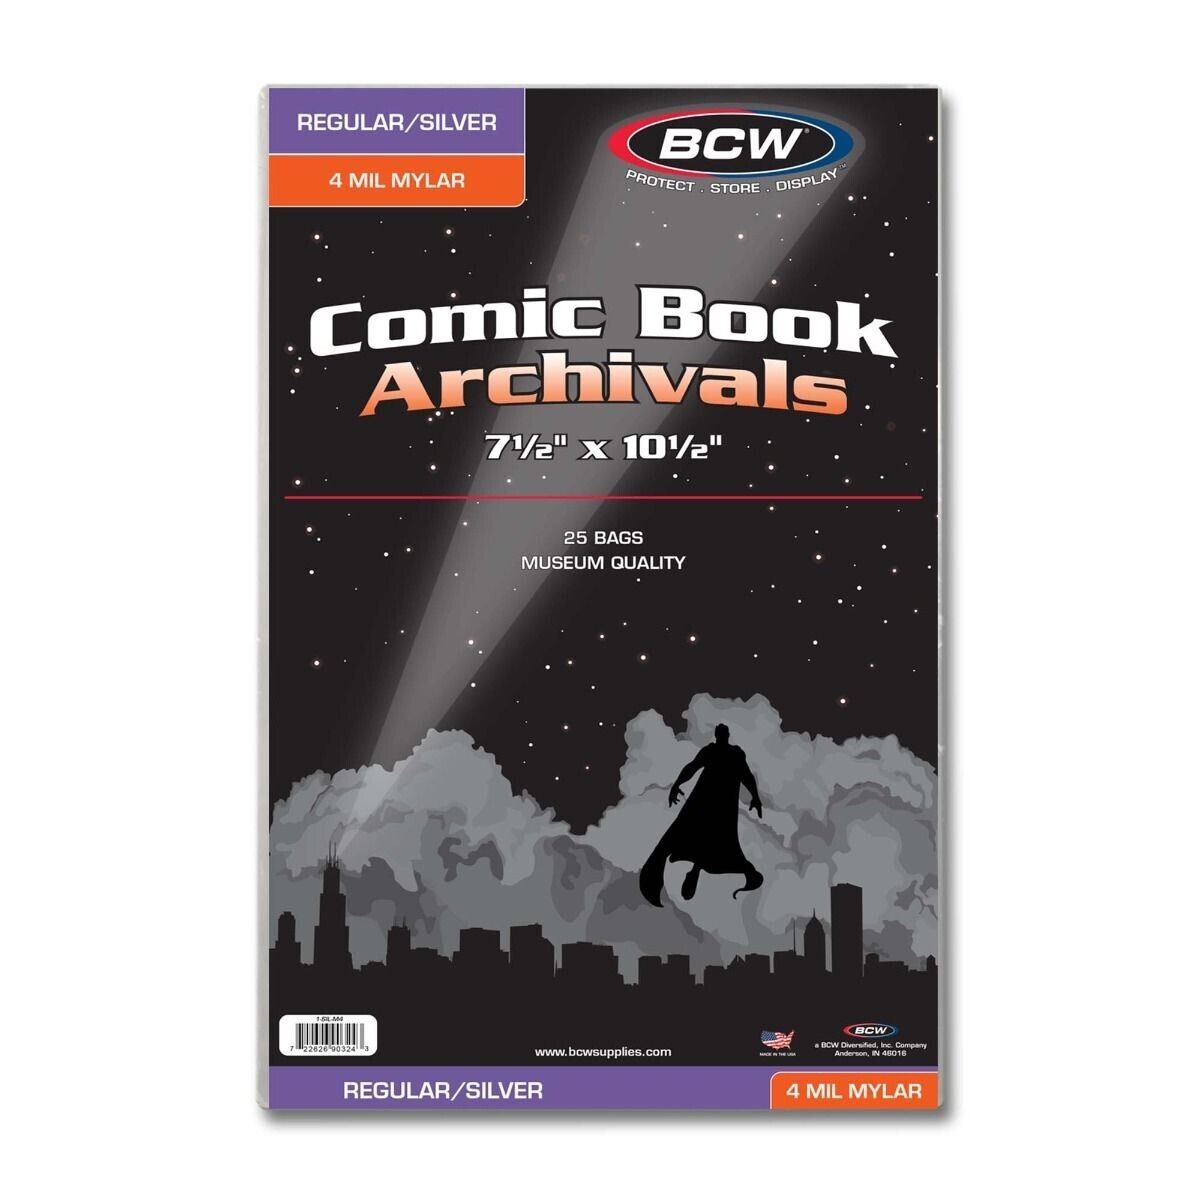 25 - BCW Archivals Regular / Silver 4-Mil Mylar Comic Book Bags  1-SIL-M4 7 ½”